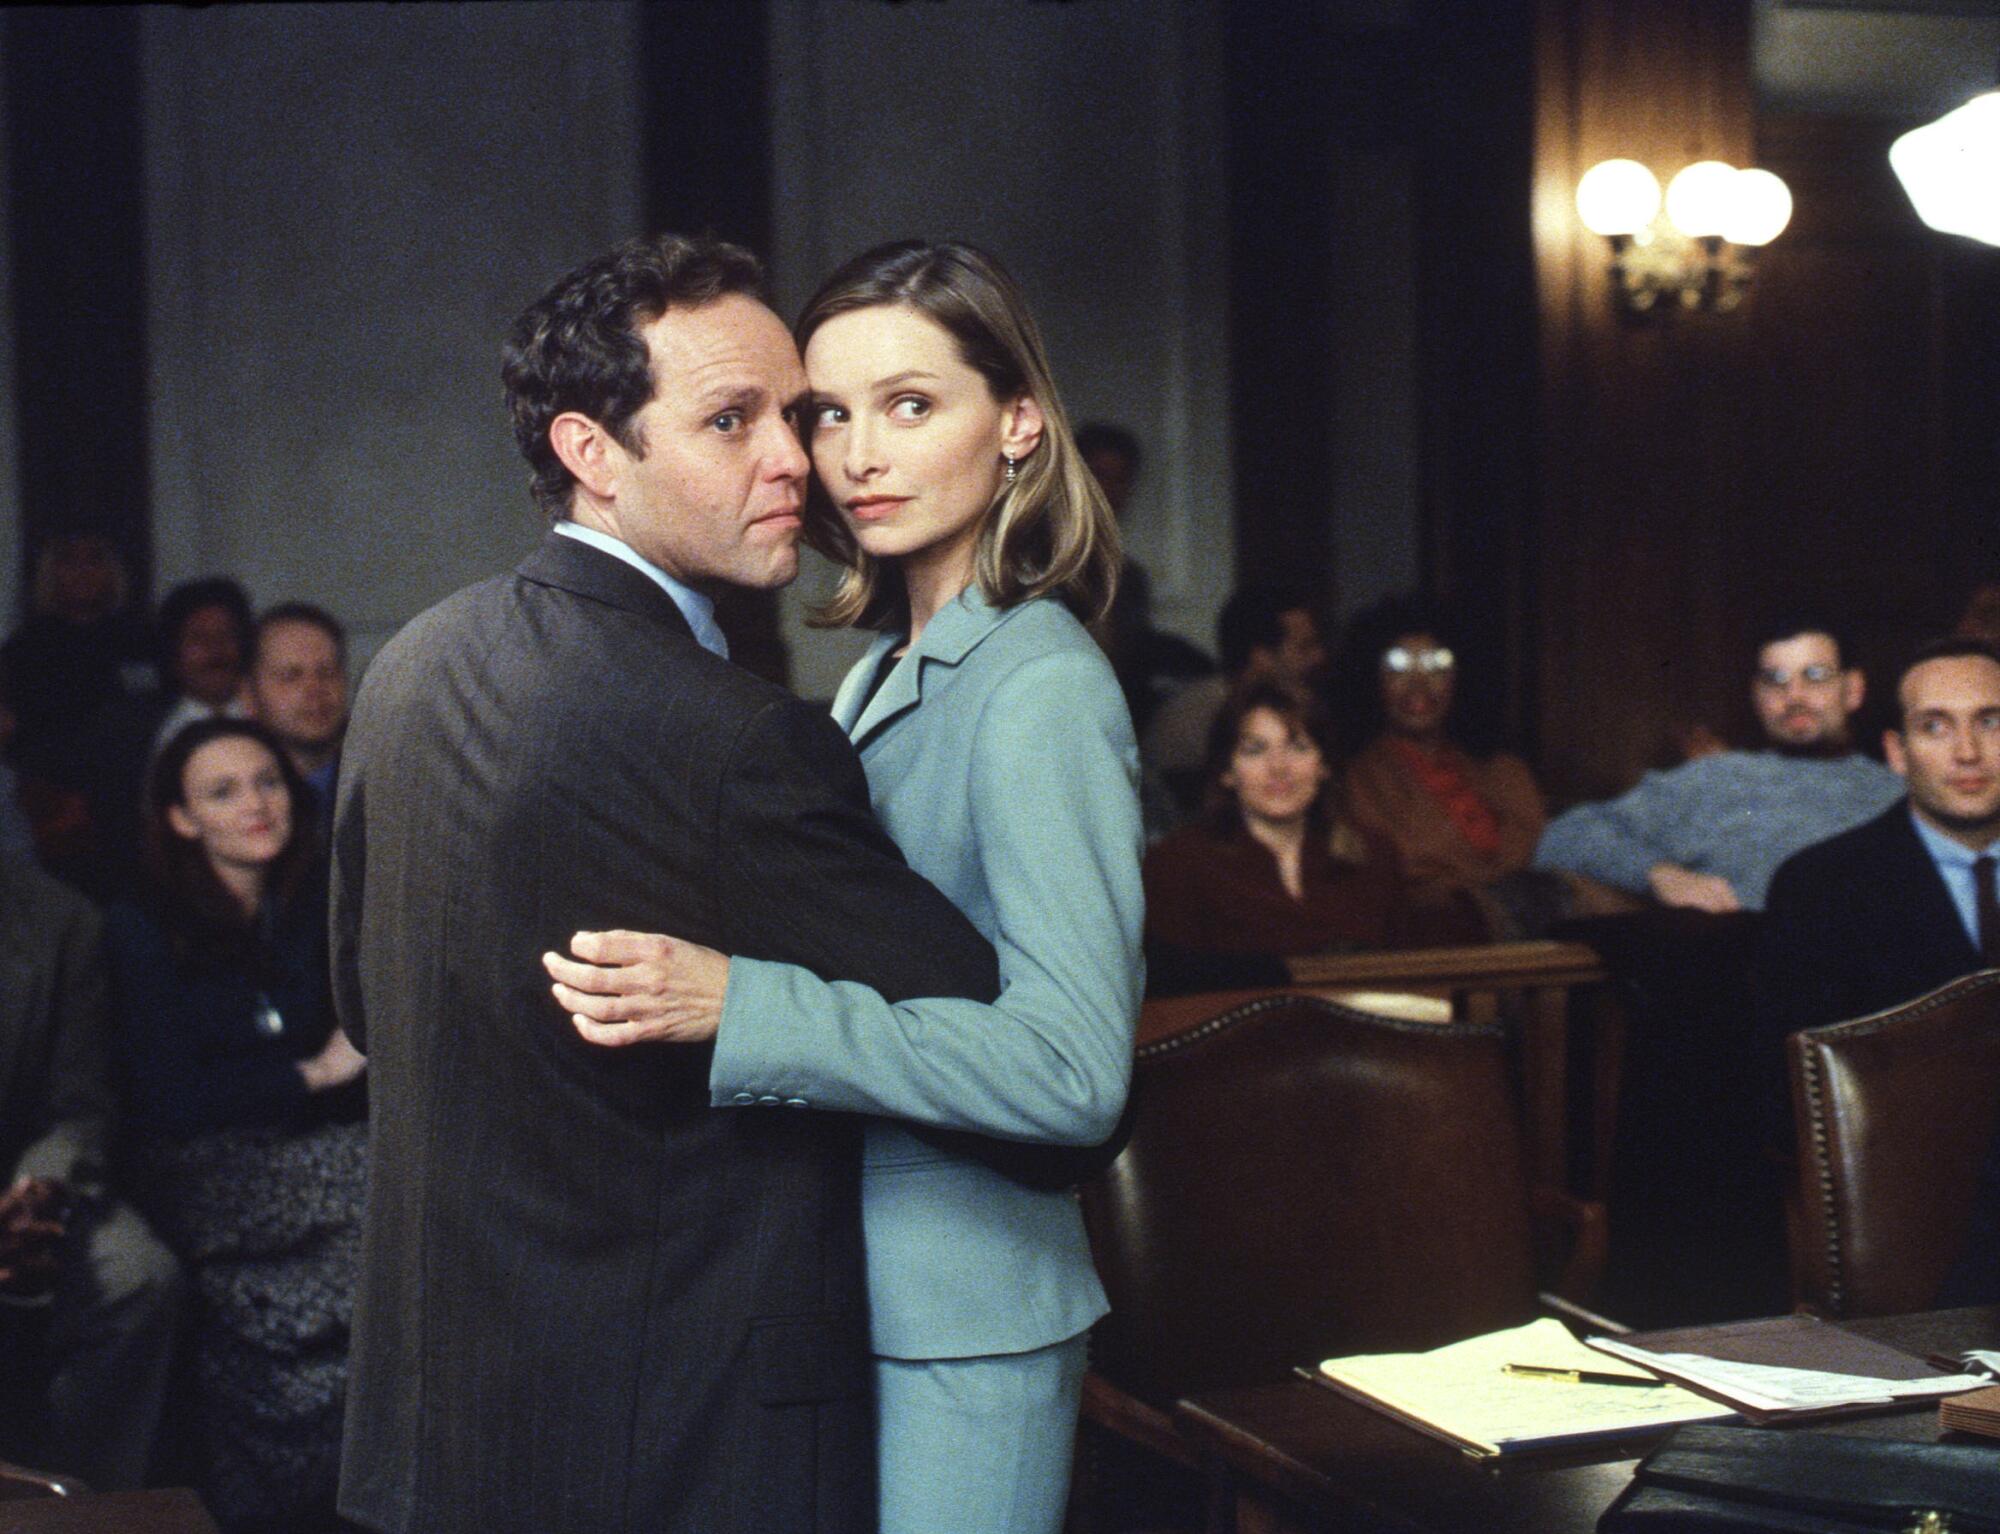 Calista Flockhart, right, as Ally and Peter MacNicol as John in "Ally McBeal" in 1998.